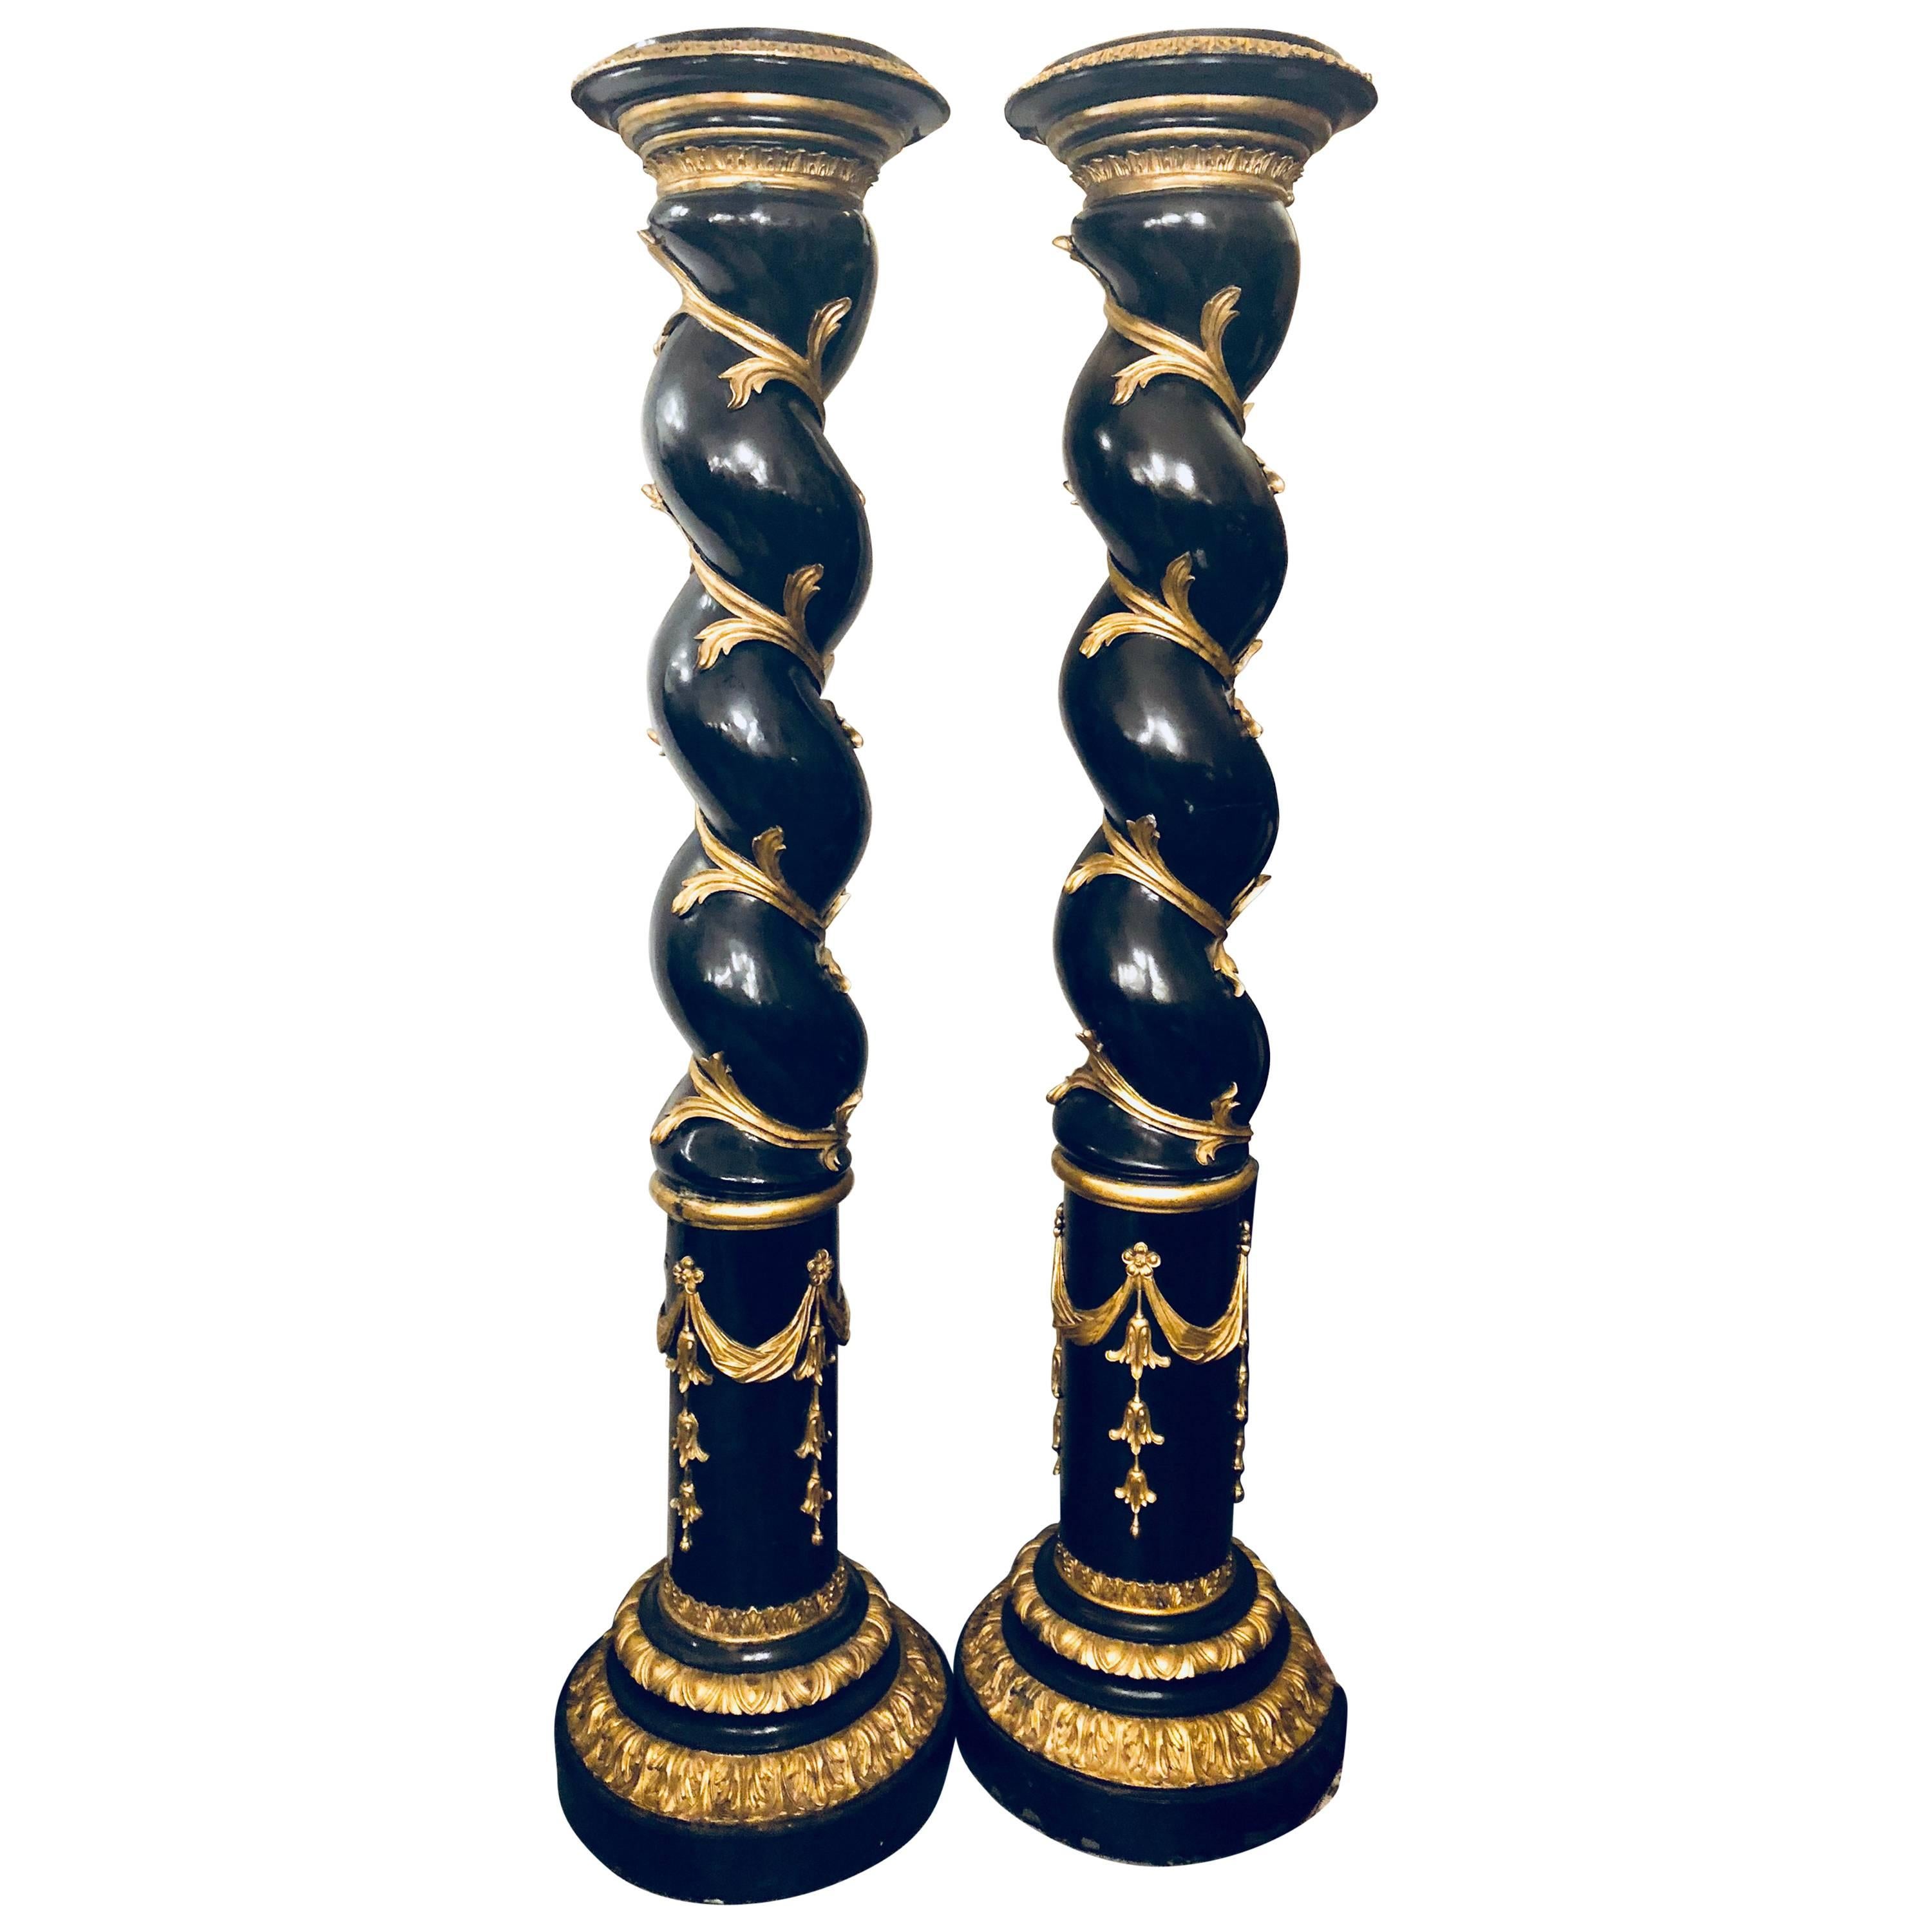 Pair of Monumental Hollywood Regency Style Pedestals Ebony and Gilt Gold Detail